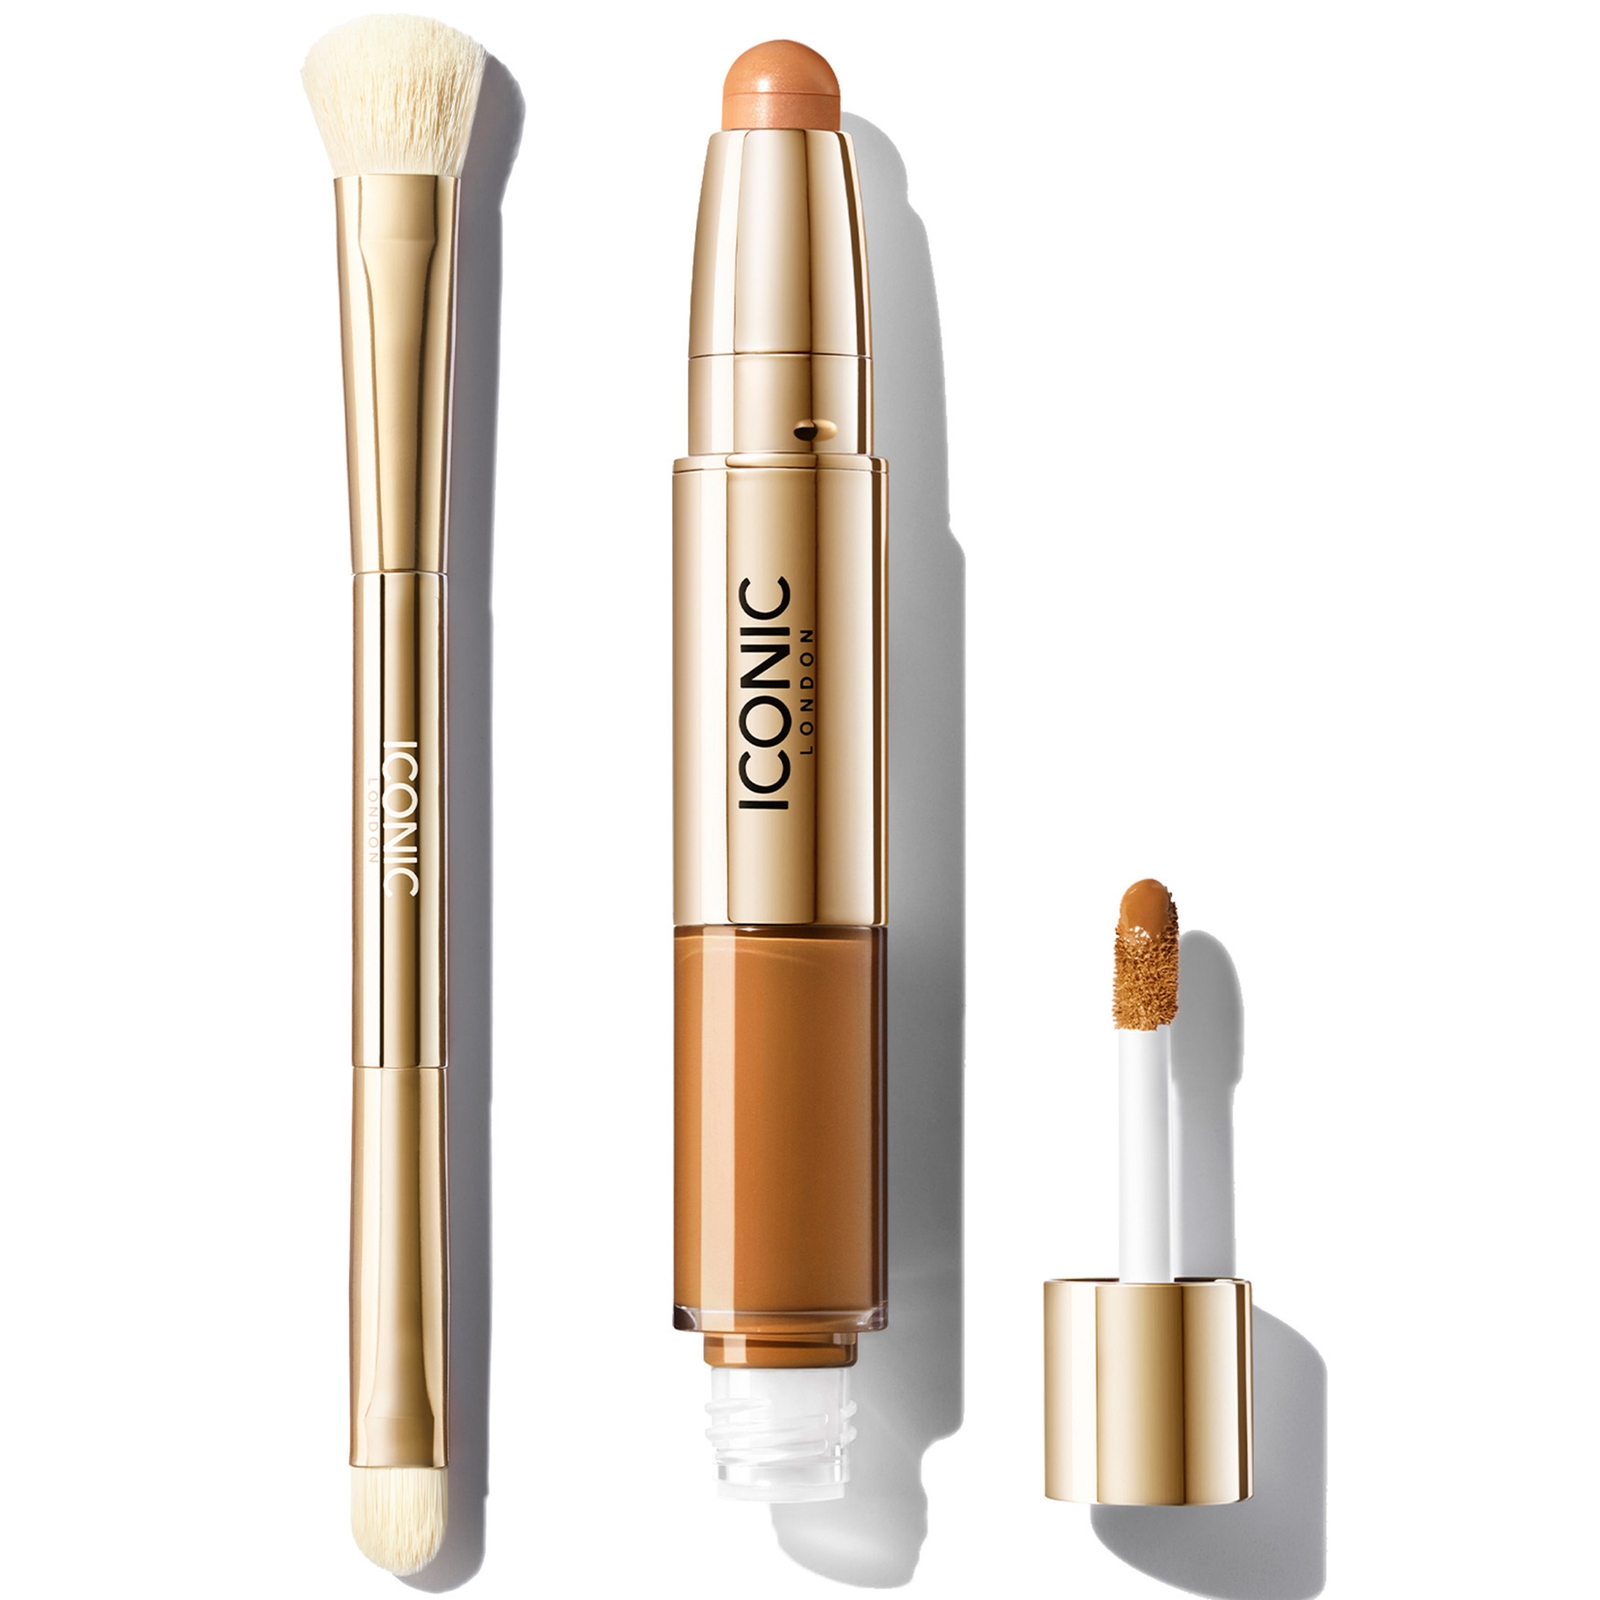 Iconic London Radiant Concealer And Brush Bundle (various Shades) - Golden Deep